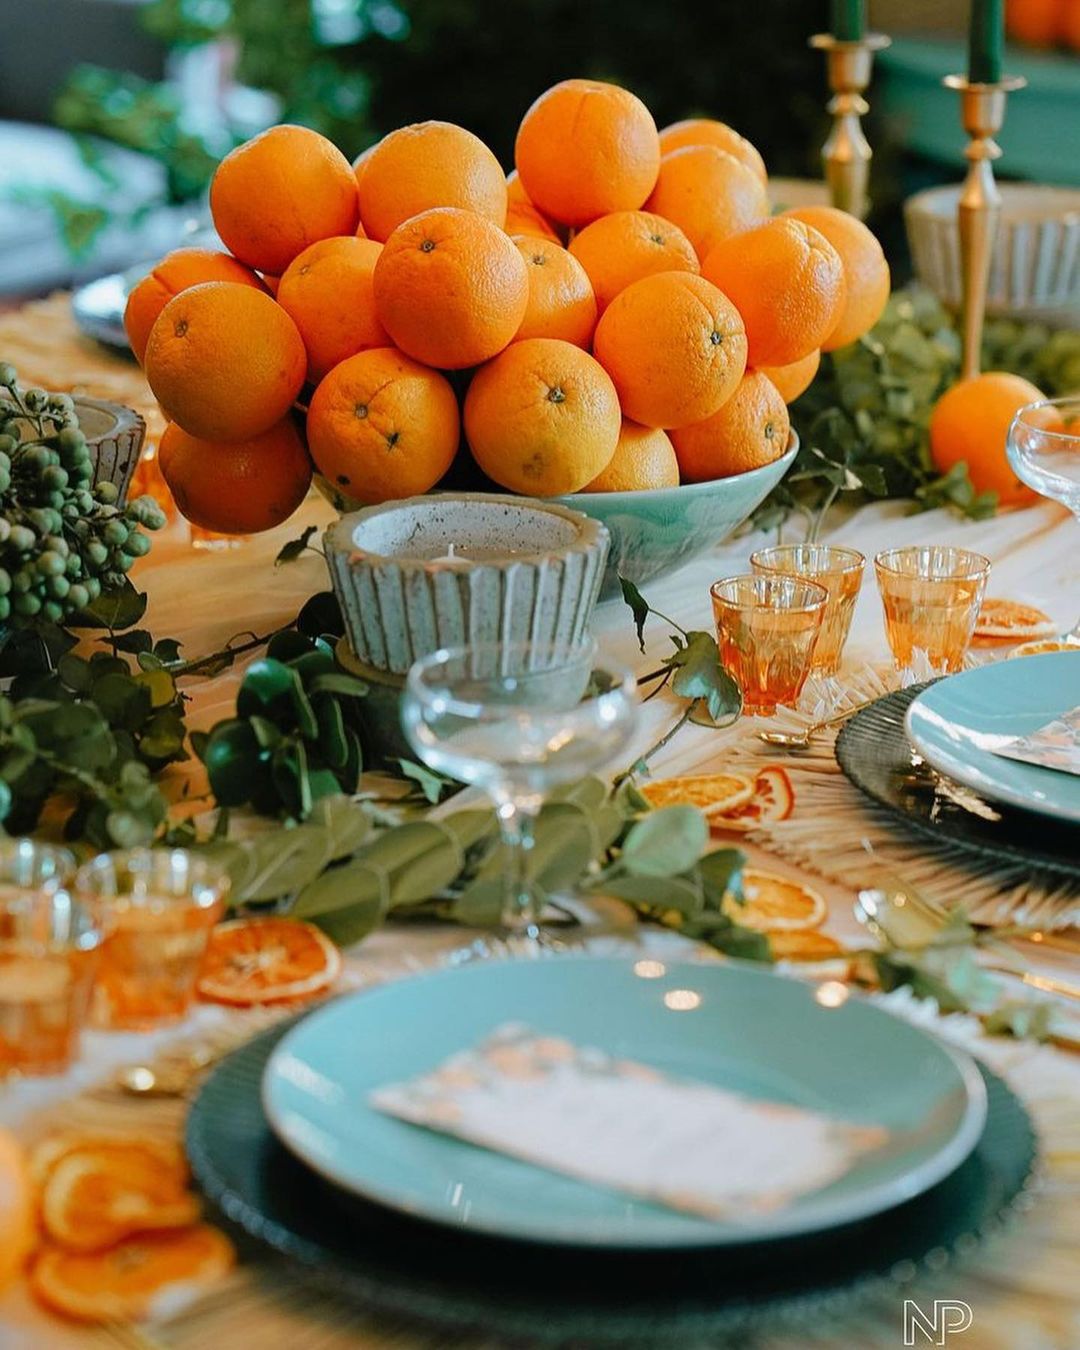 Angel Locsin throws a Thanksgiving dinner for her family - oranges